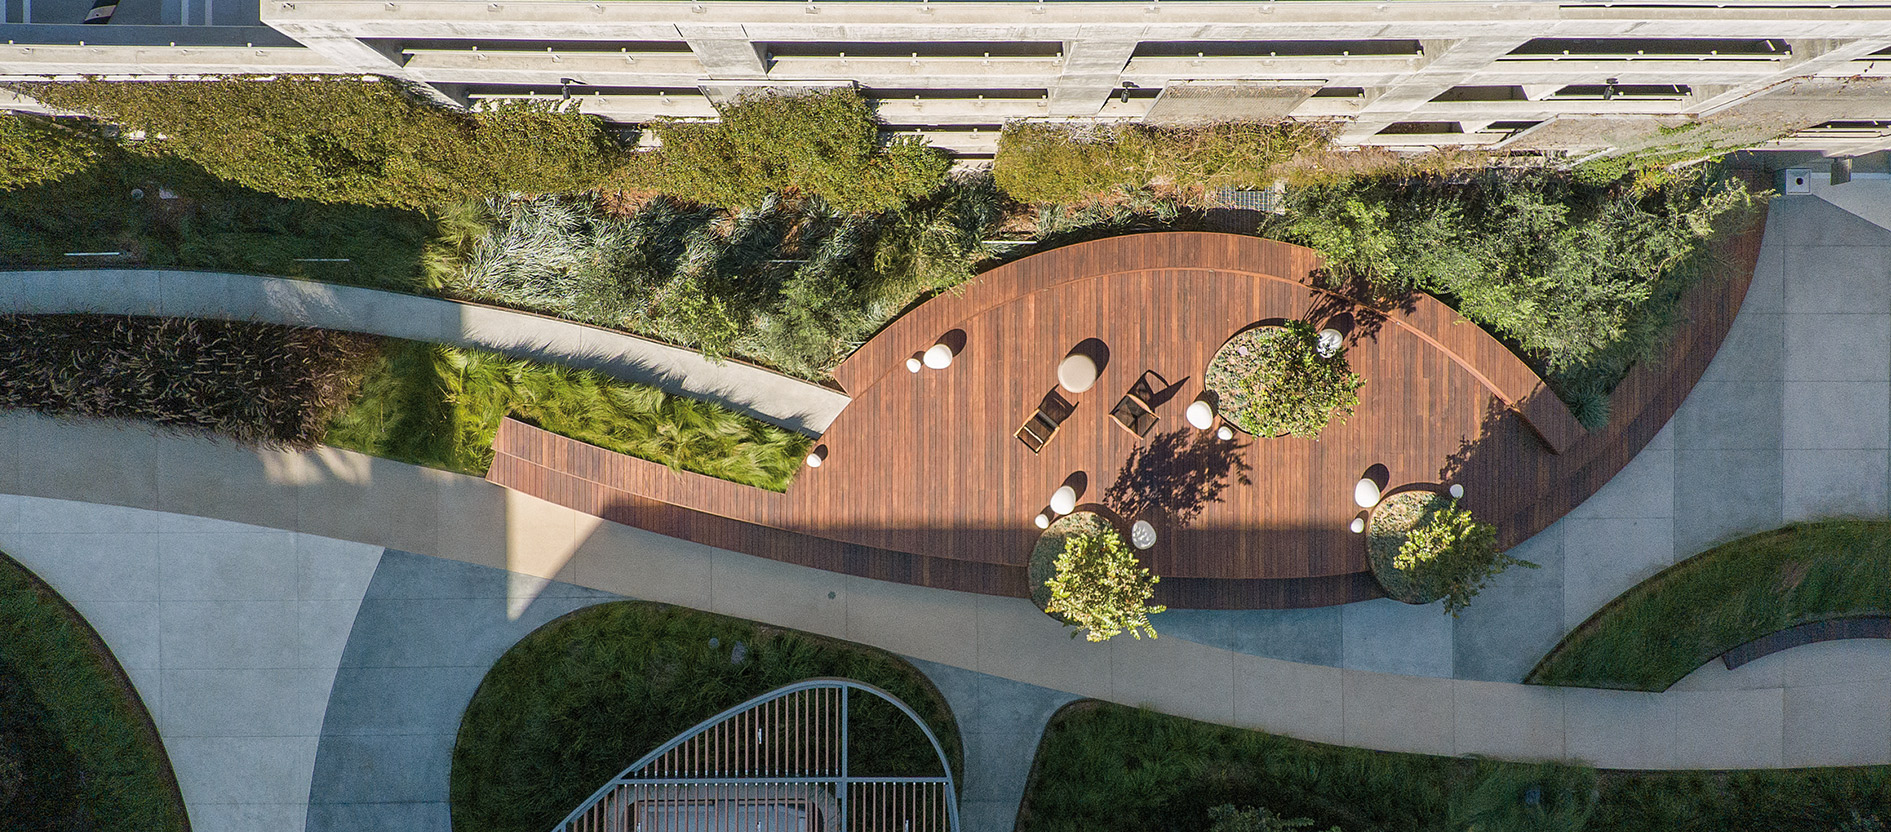 An aerial view of a modern rooftop garden incorporating sleek wooden decking, elegant landscaping, and stylish outdoor seating areas, creating an inviting urban oasis amidst the geometric architecture.